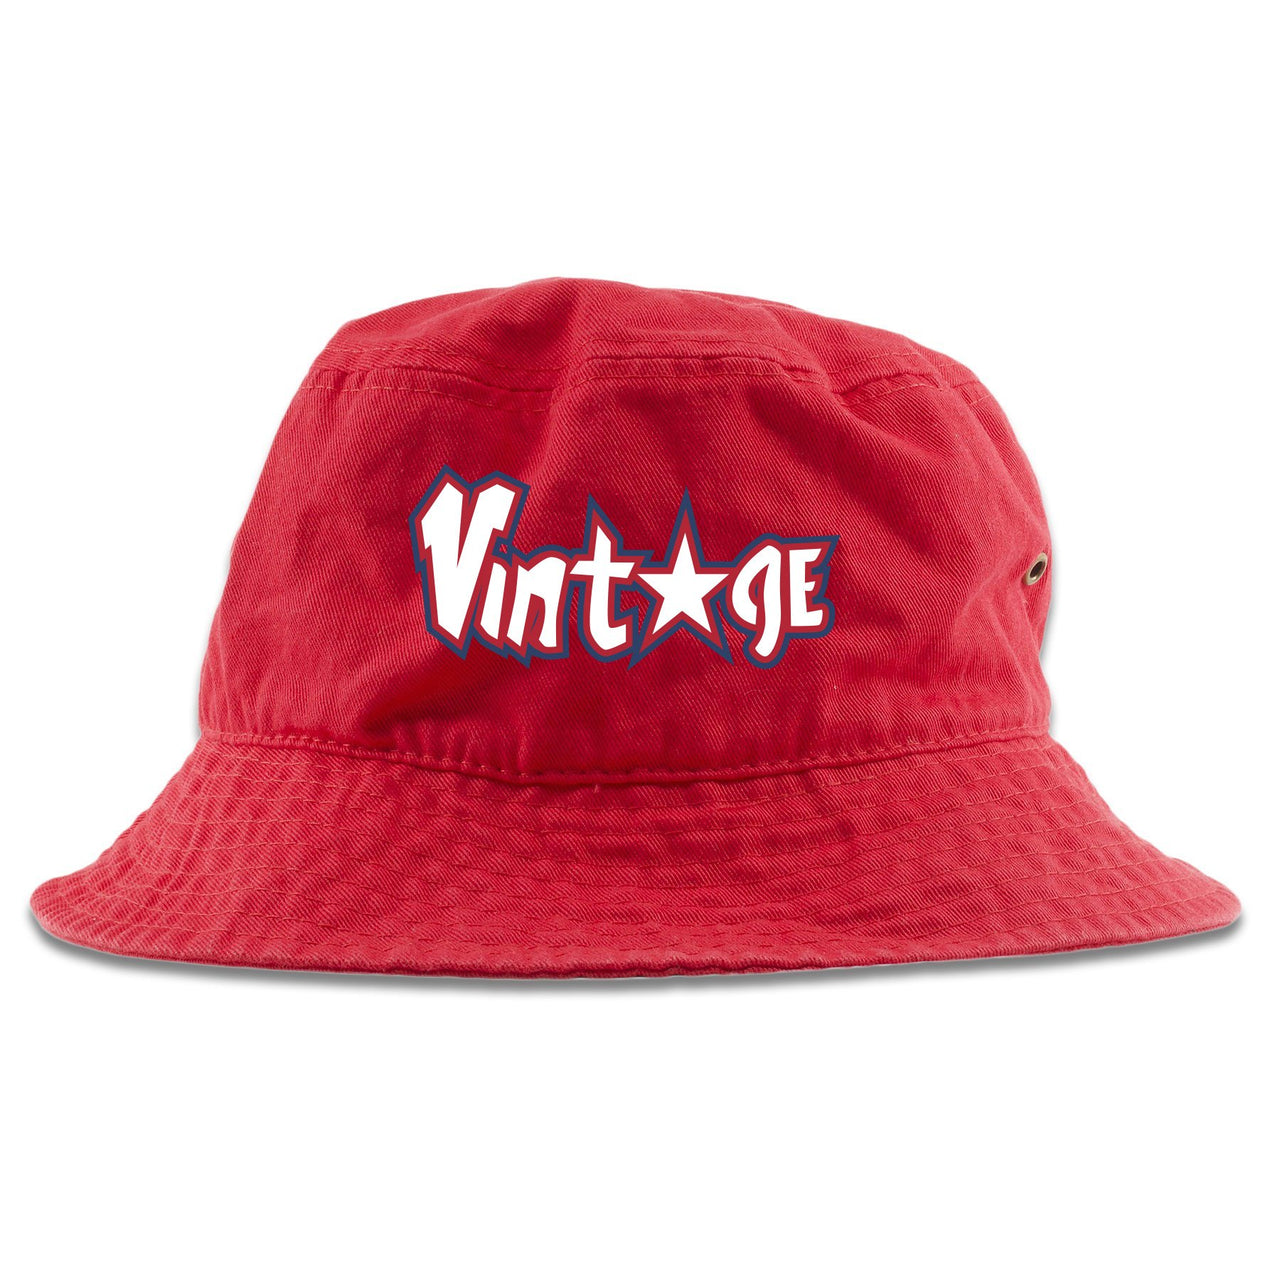 USA One Foams Bucket Hat | Vintage Star, Red